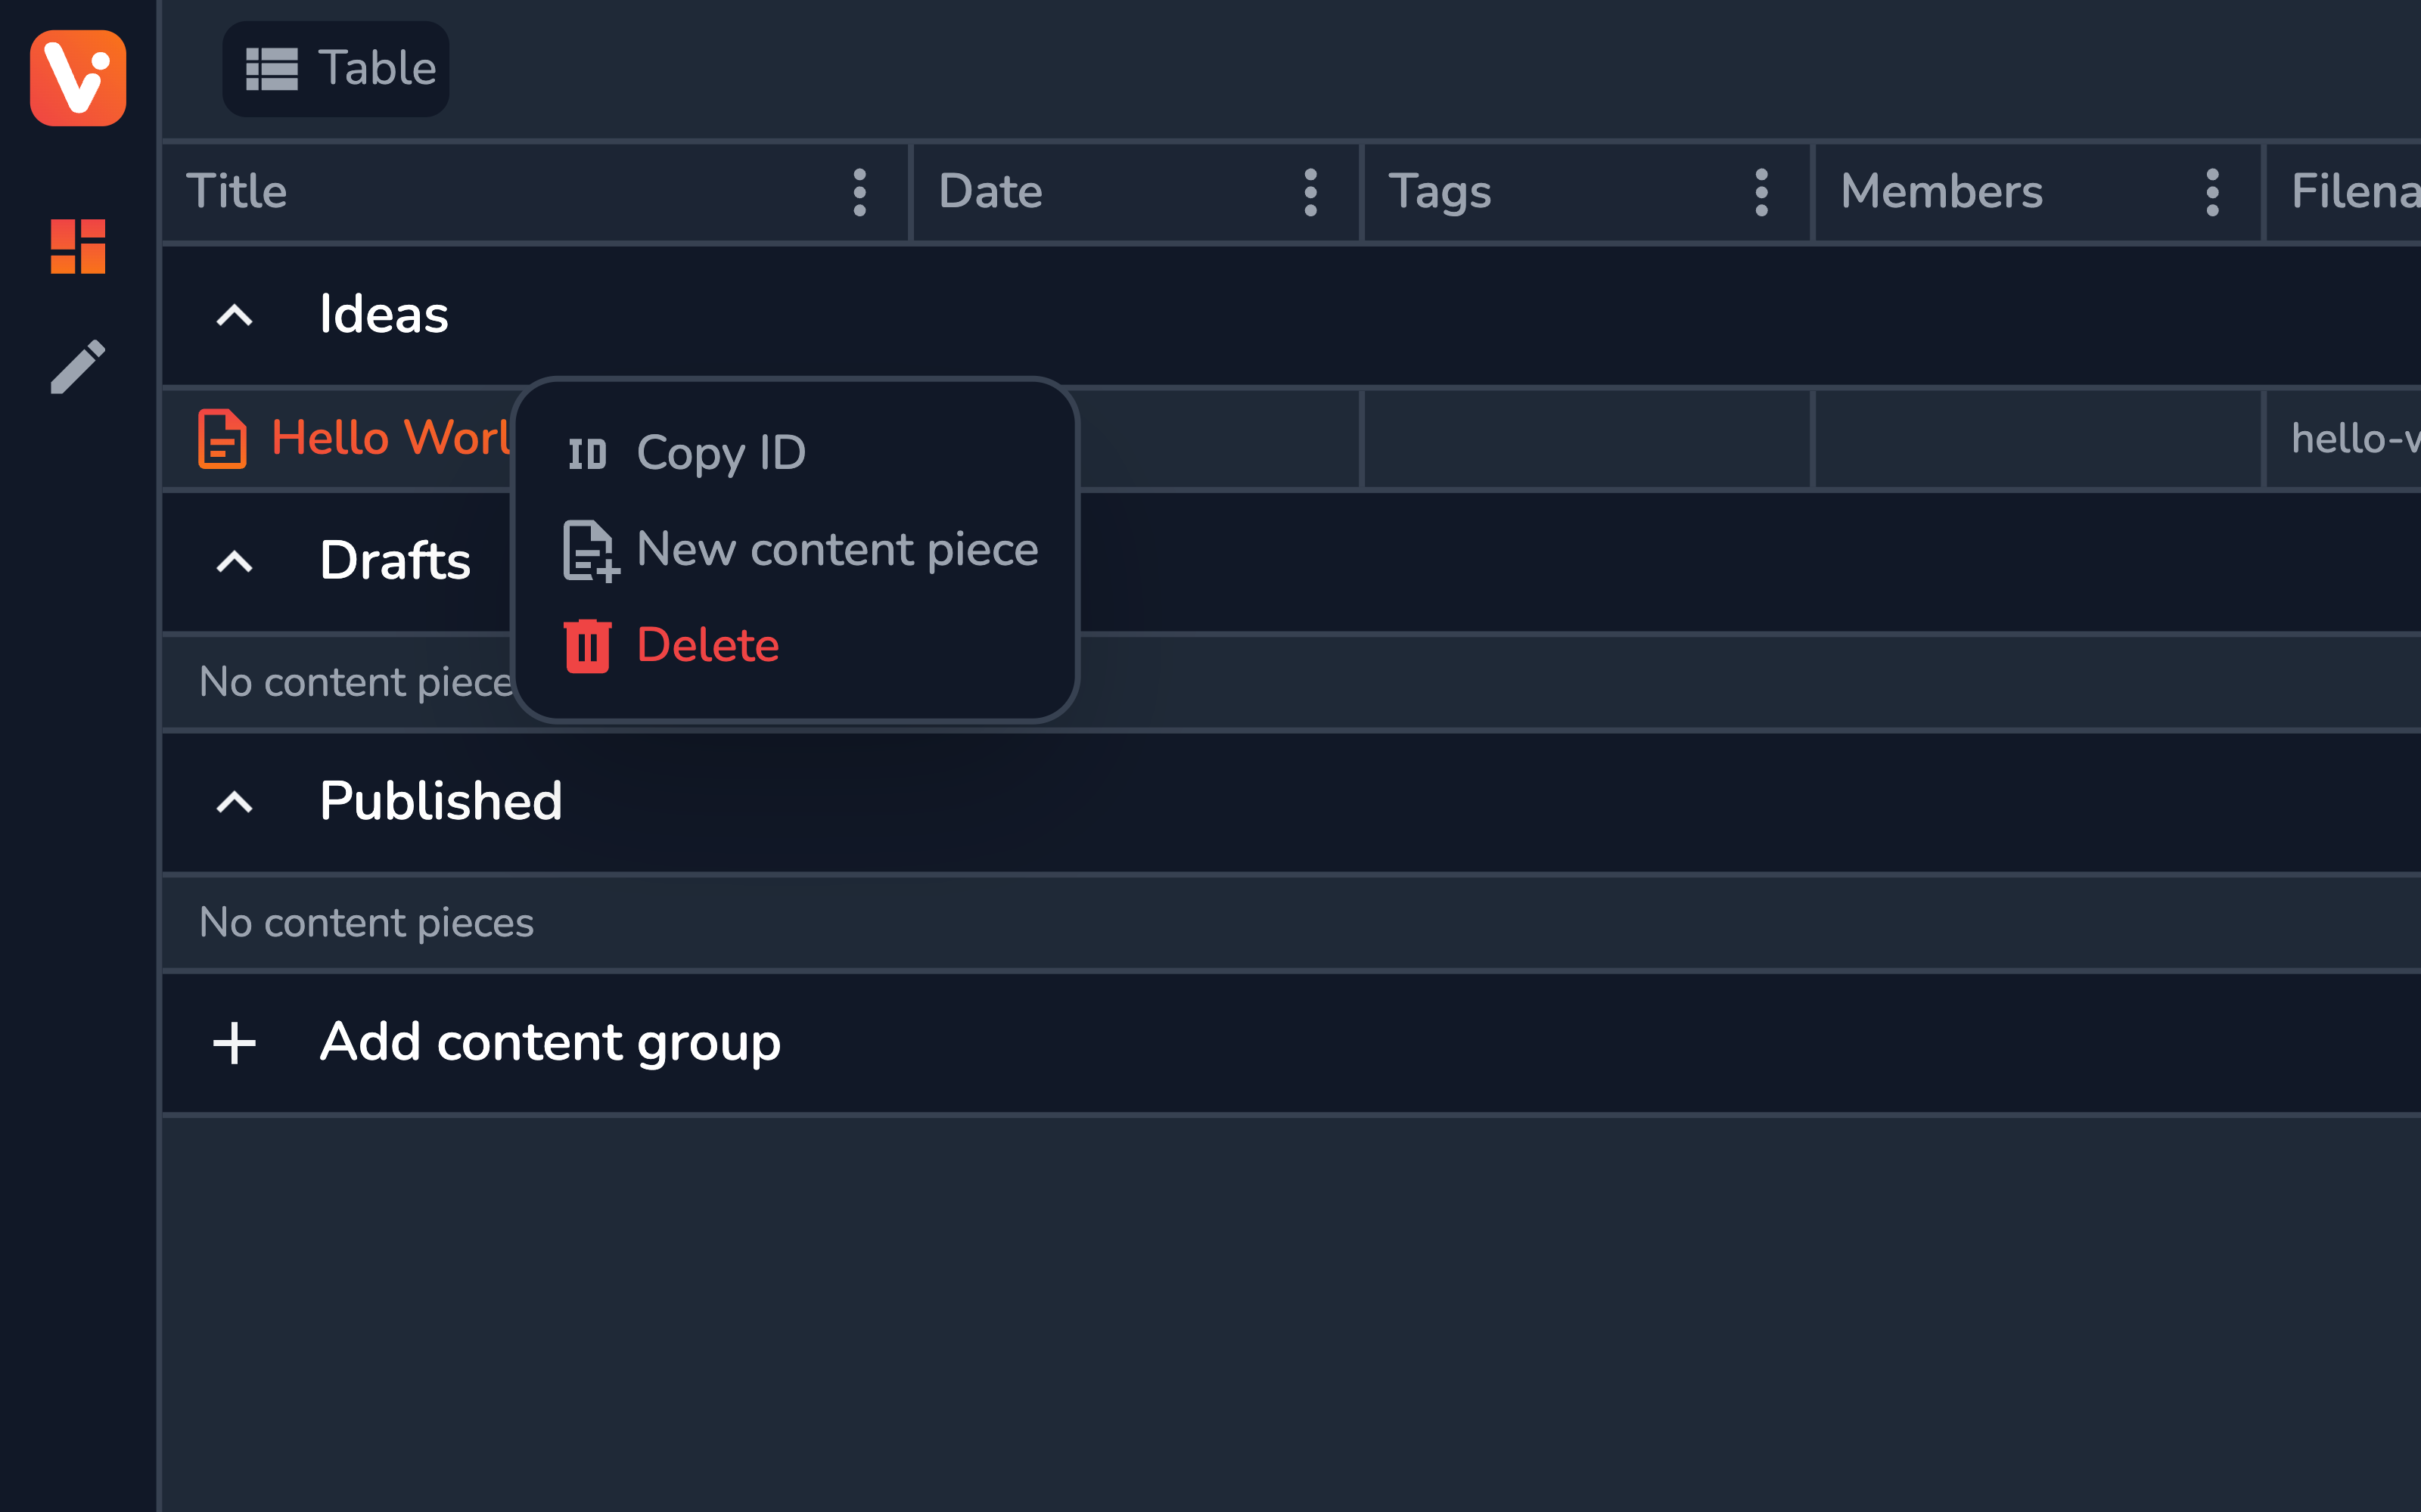 Content group menu in the table view